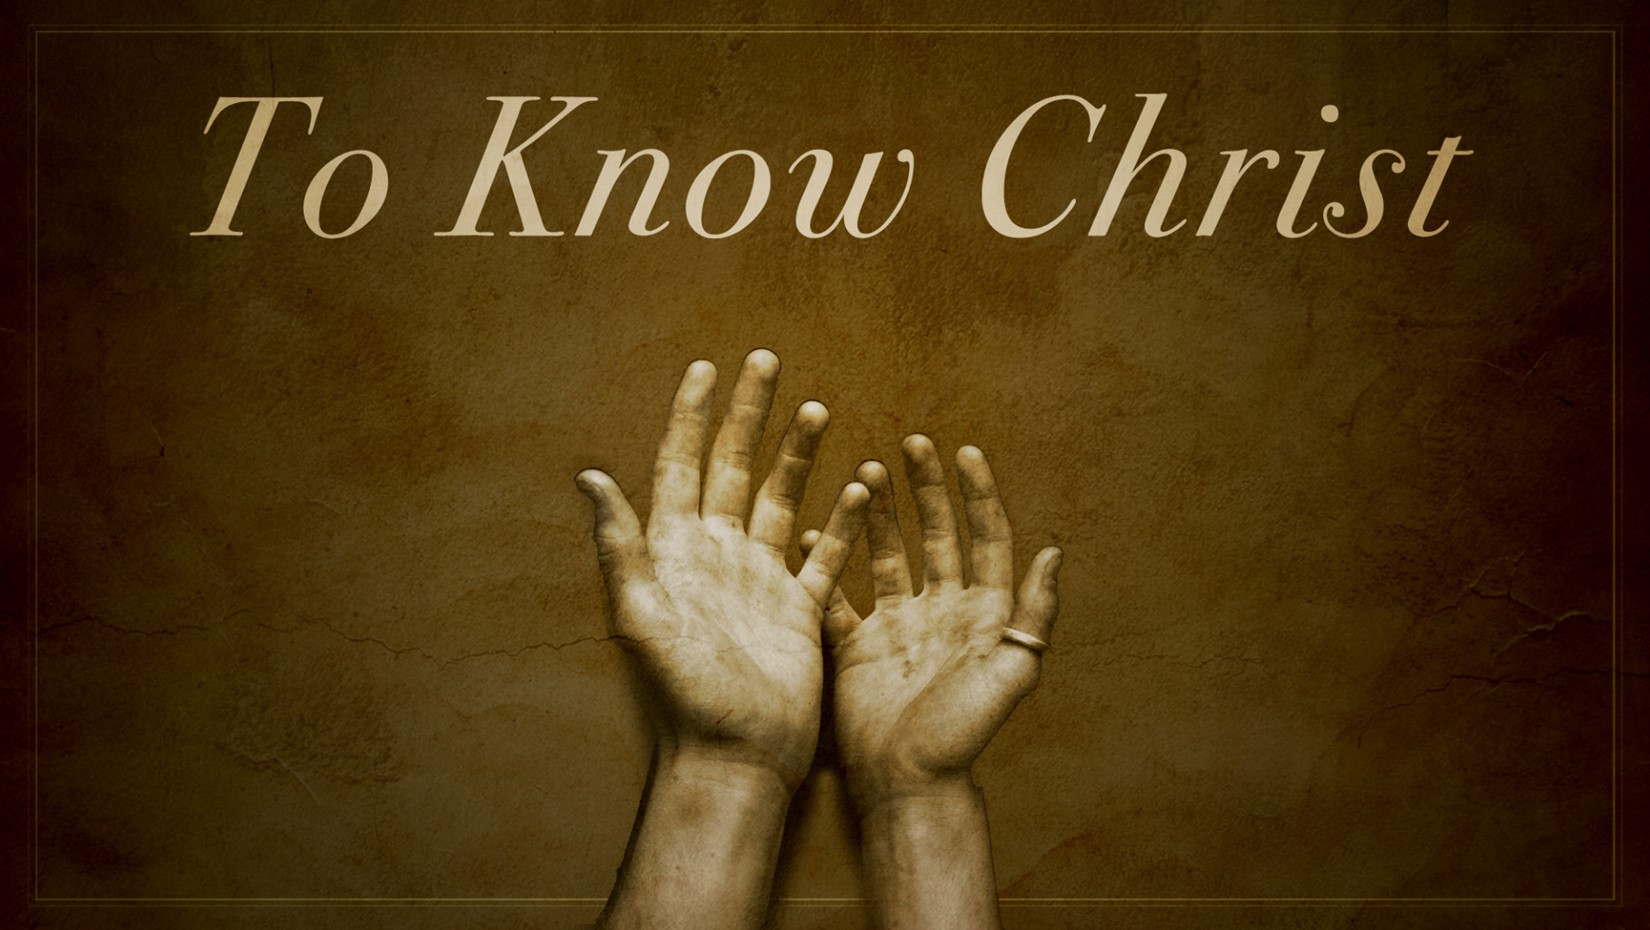 05.16.2021 To Know Christ: Outposts